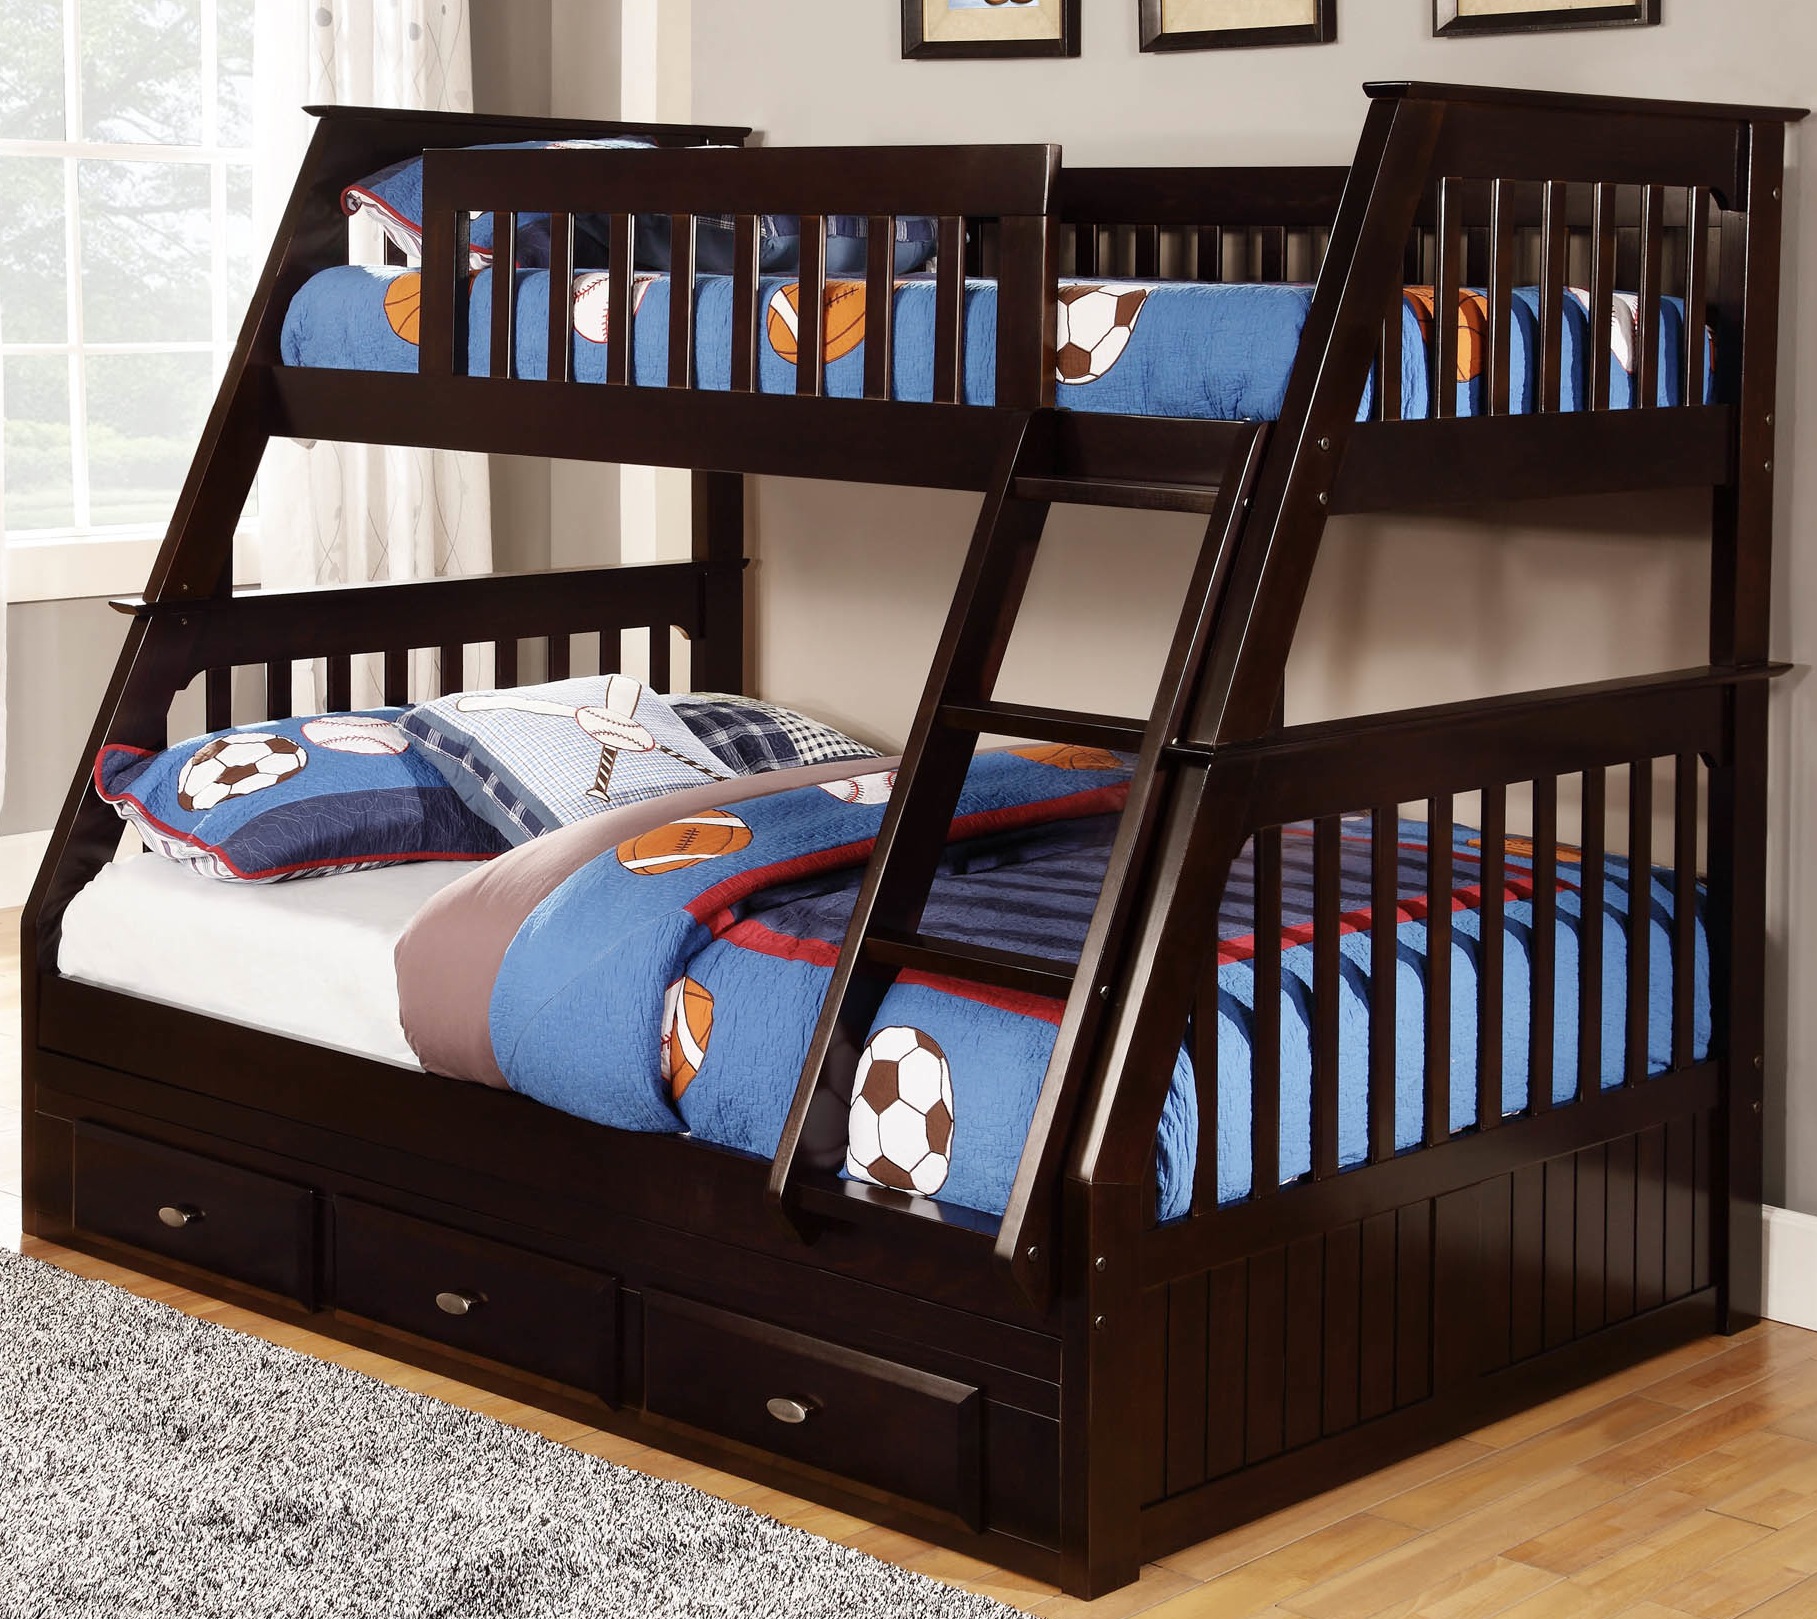 Espresso Mission Bunk Bed Kfs S, Bunk Bed Full And Twin